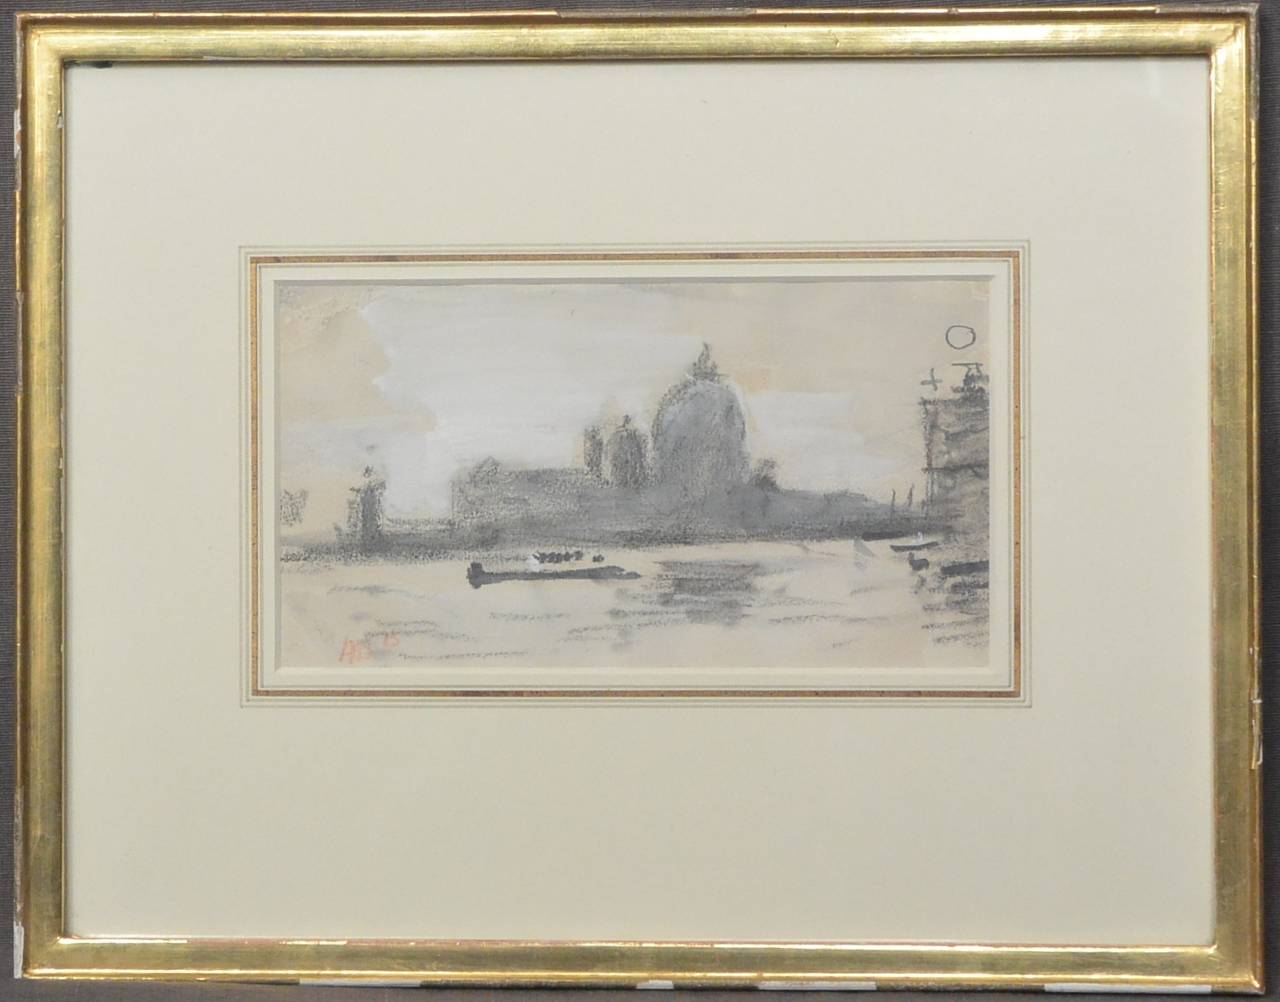 Santa Maria della Salute drawing by Hercules Brabazon Brabazon (1821-1906).
Crayon and pencil on tinted paper in water-gilt frame. Signed with initials HBB inscribed in artist's hand.
Dimension: Frame 12.75